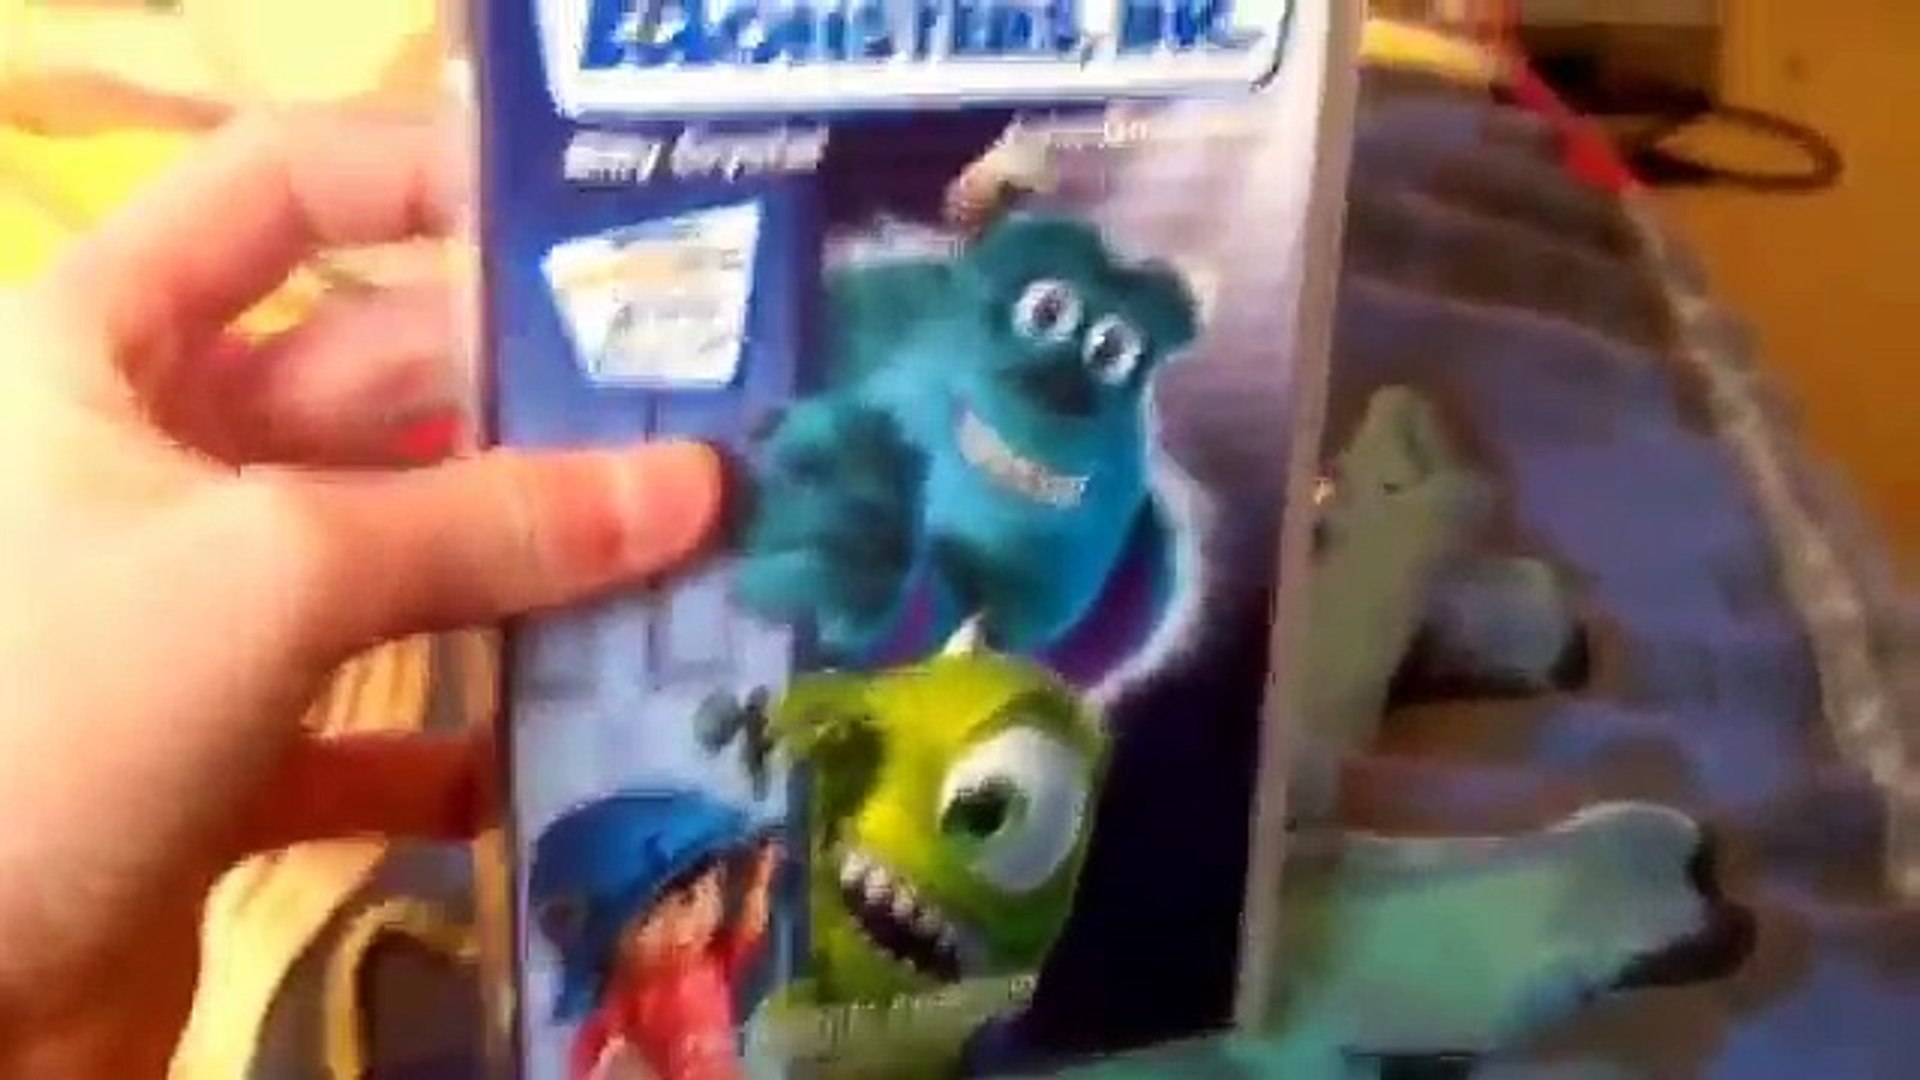 monsters inc vhs